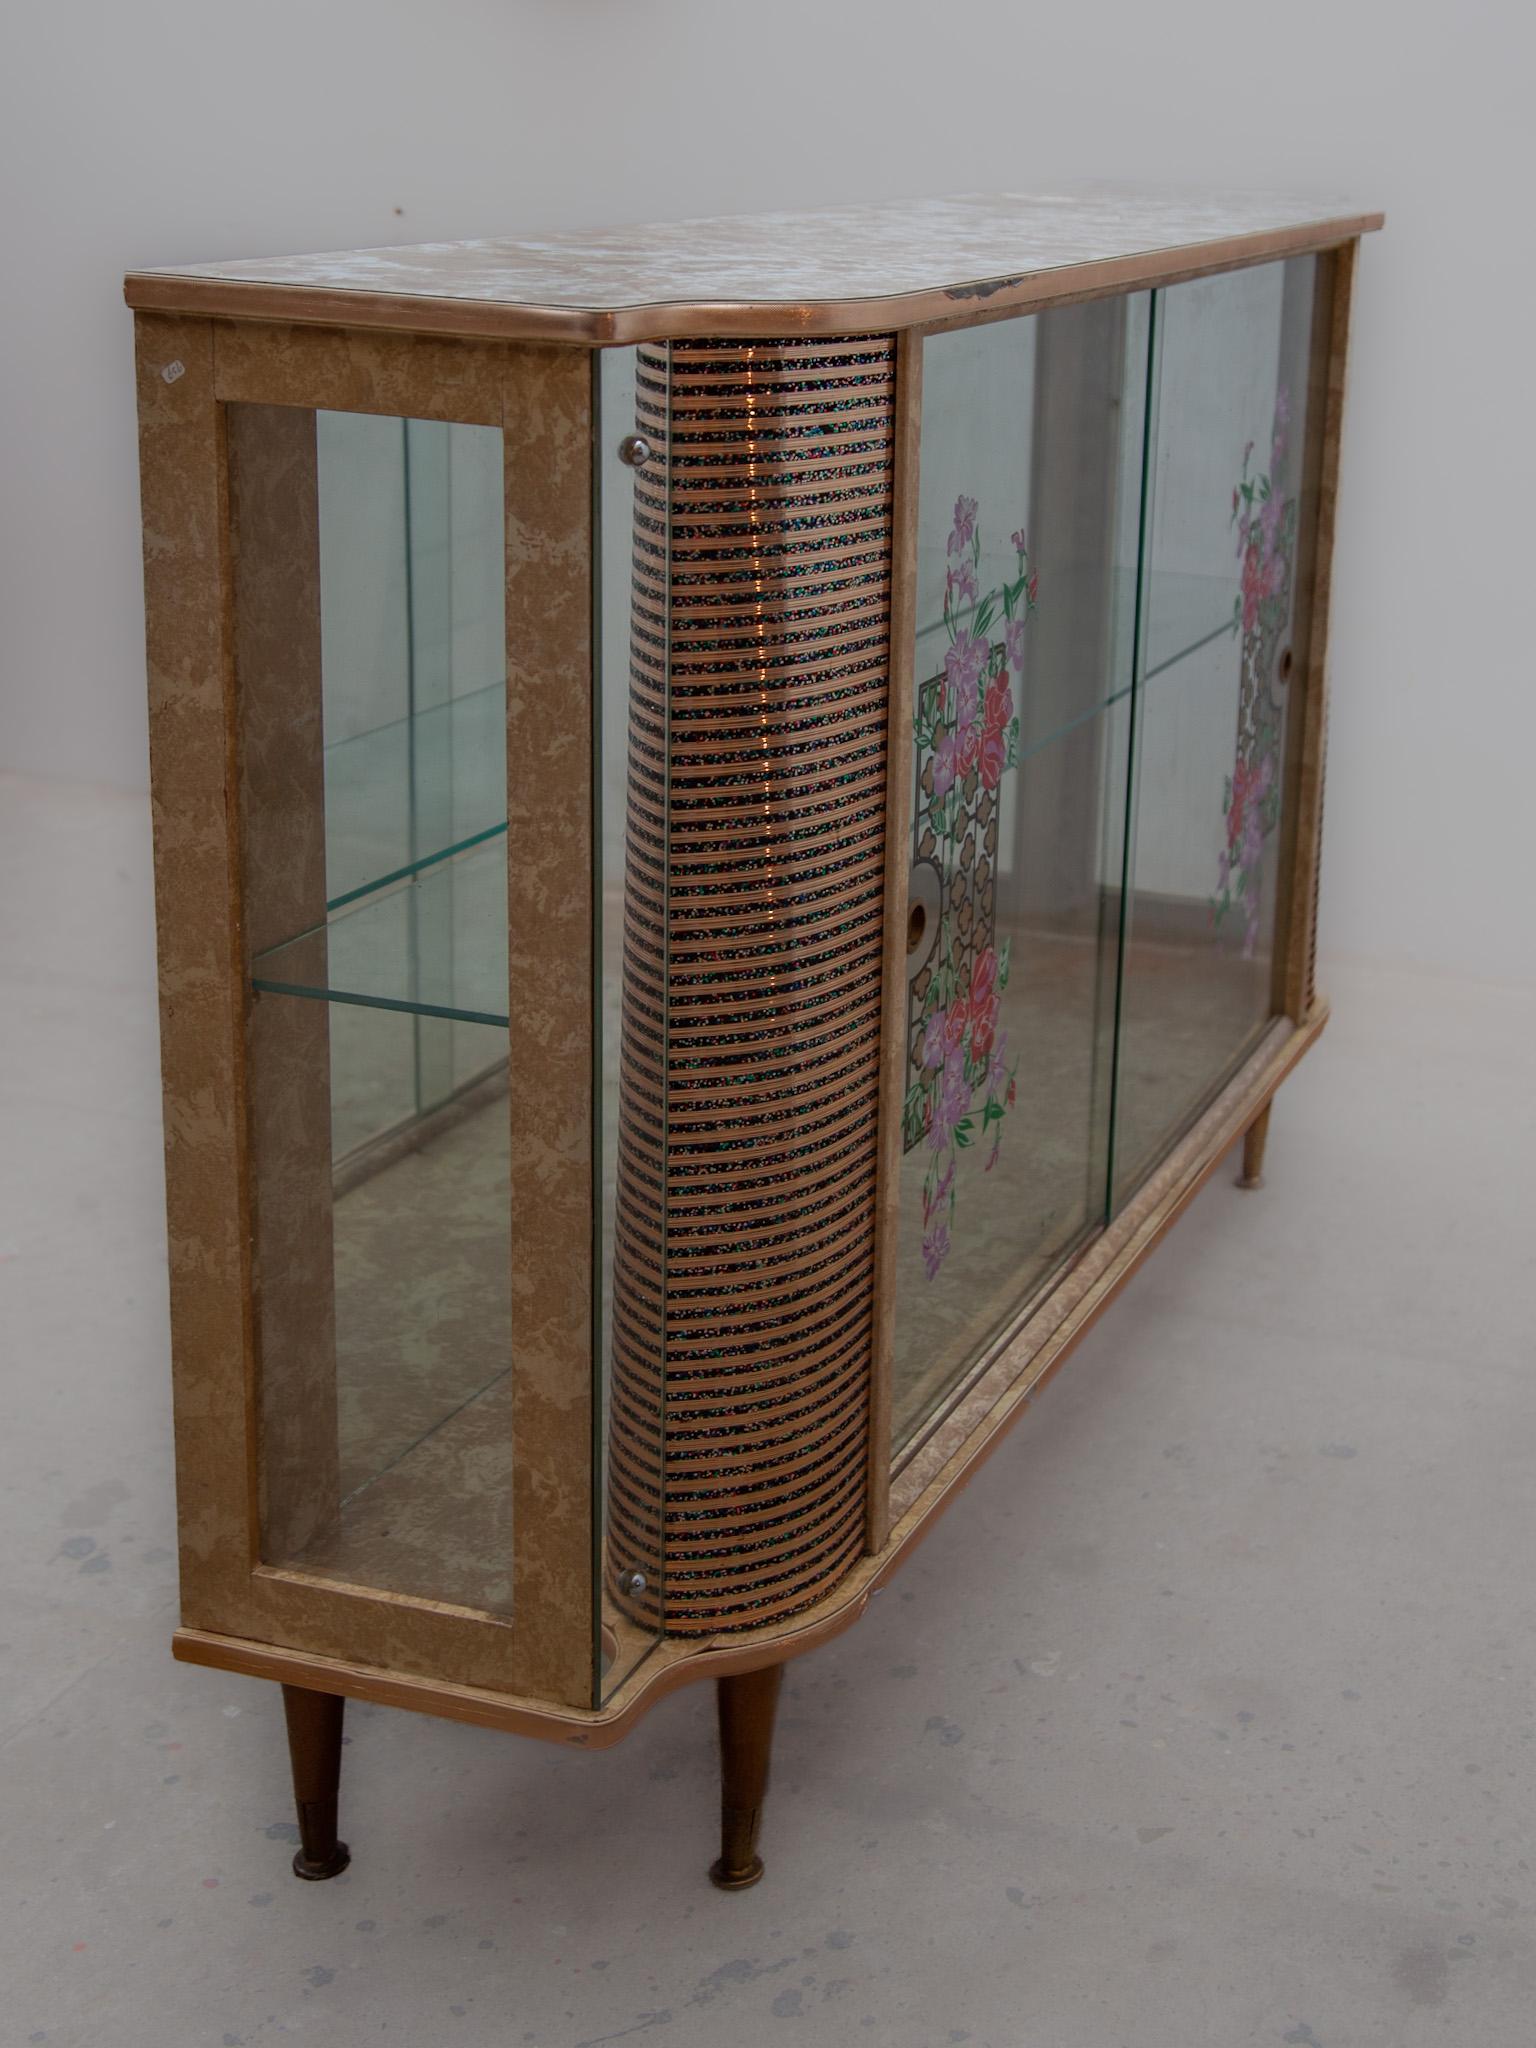  Vintage Glass Bar, Coctail, Display Cabinet with Shelves, 1950s 4